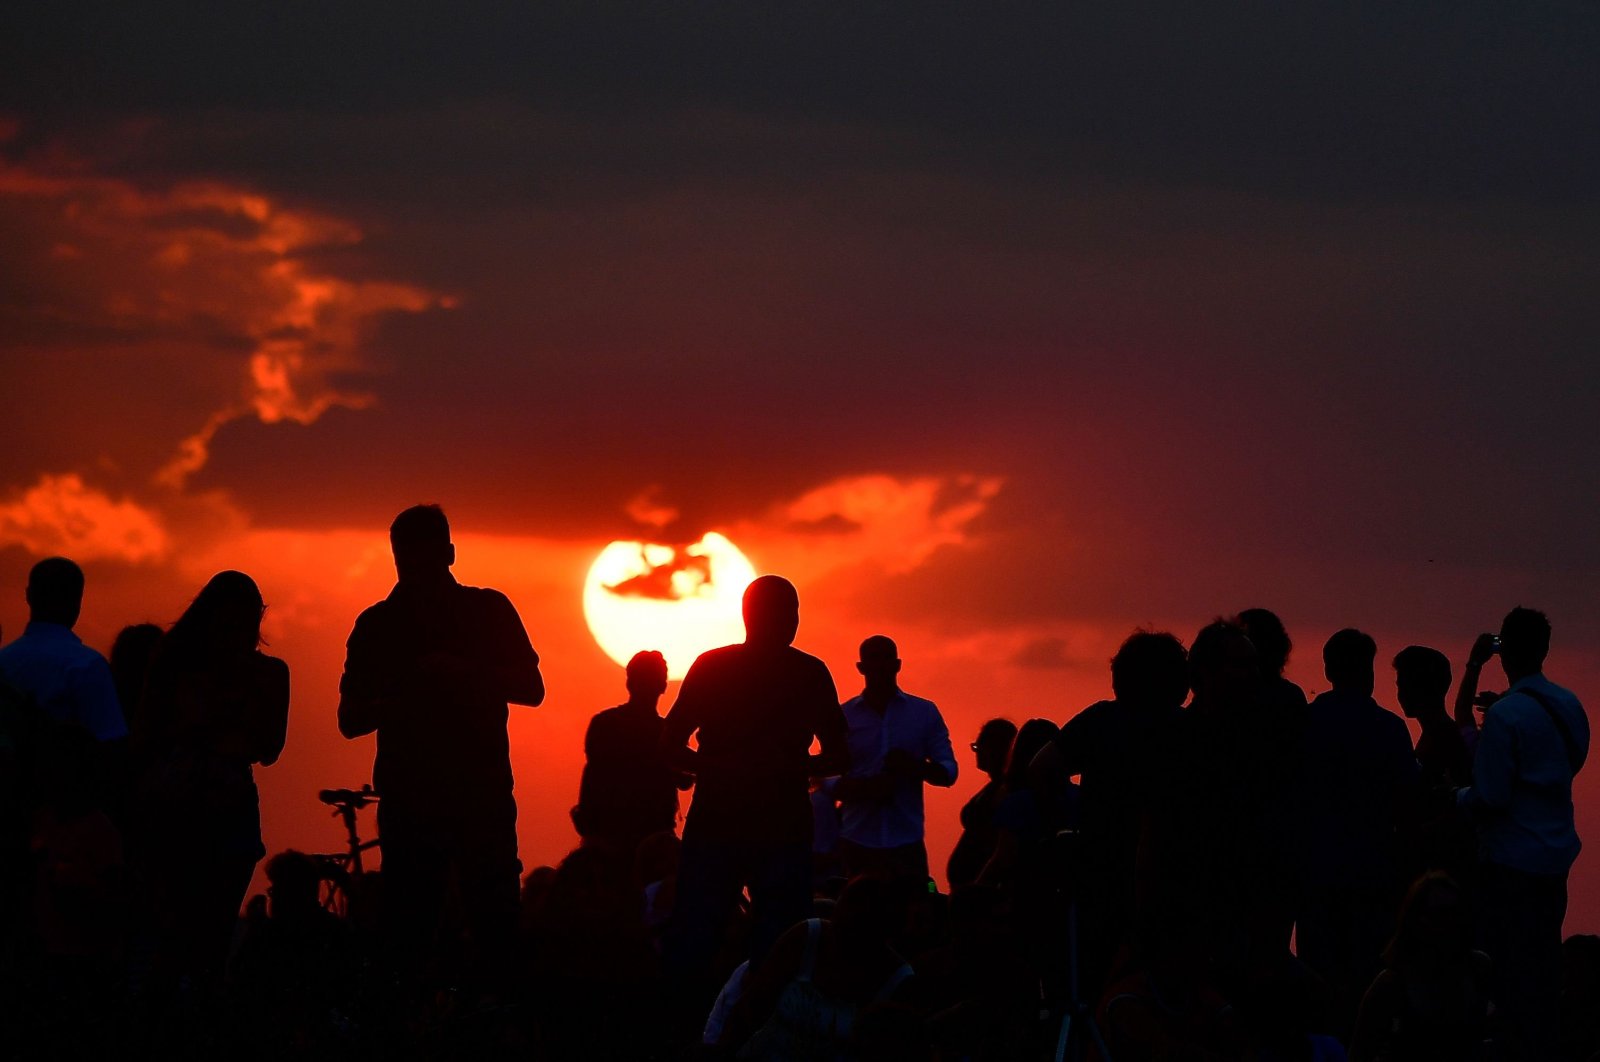 People gather as they wait for the sun to go down and the appearance of the "Blood moon" in Berlin, Germany, on July 27, 2018. (AFP PHOTO/Tobias SCHWARZ)